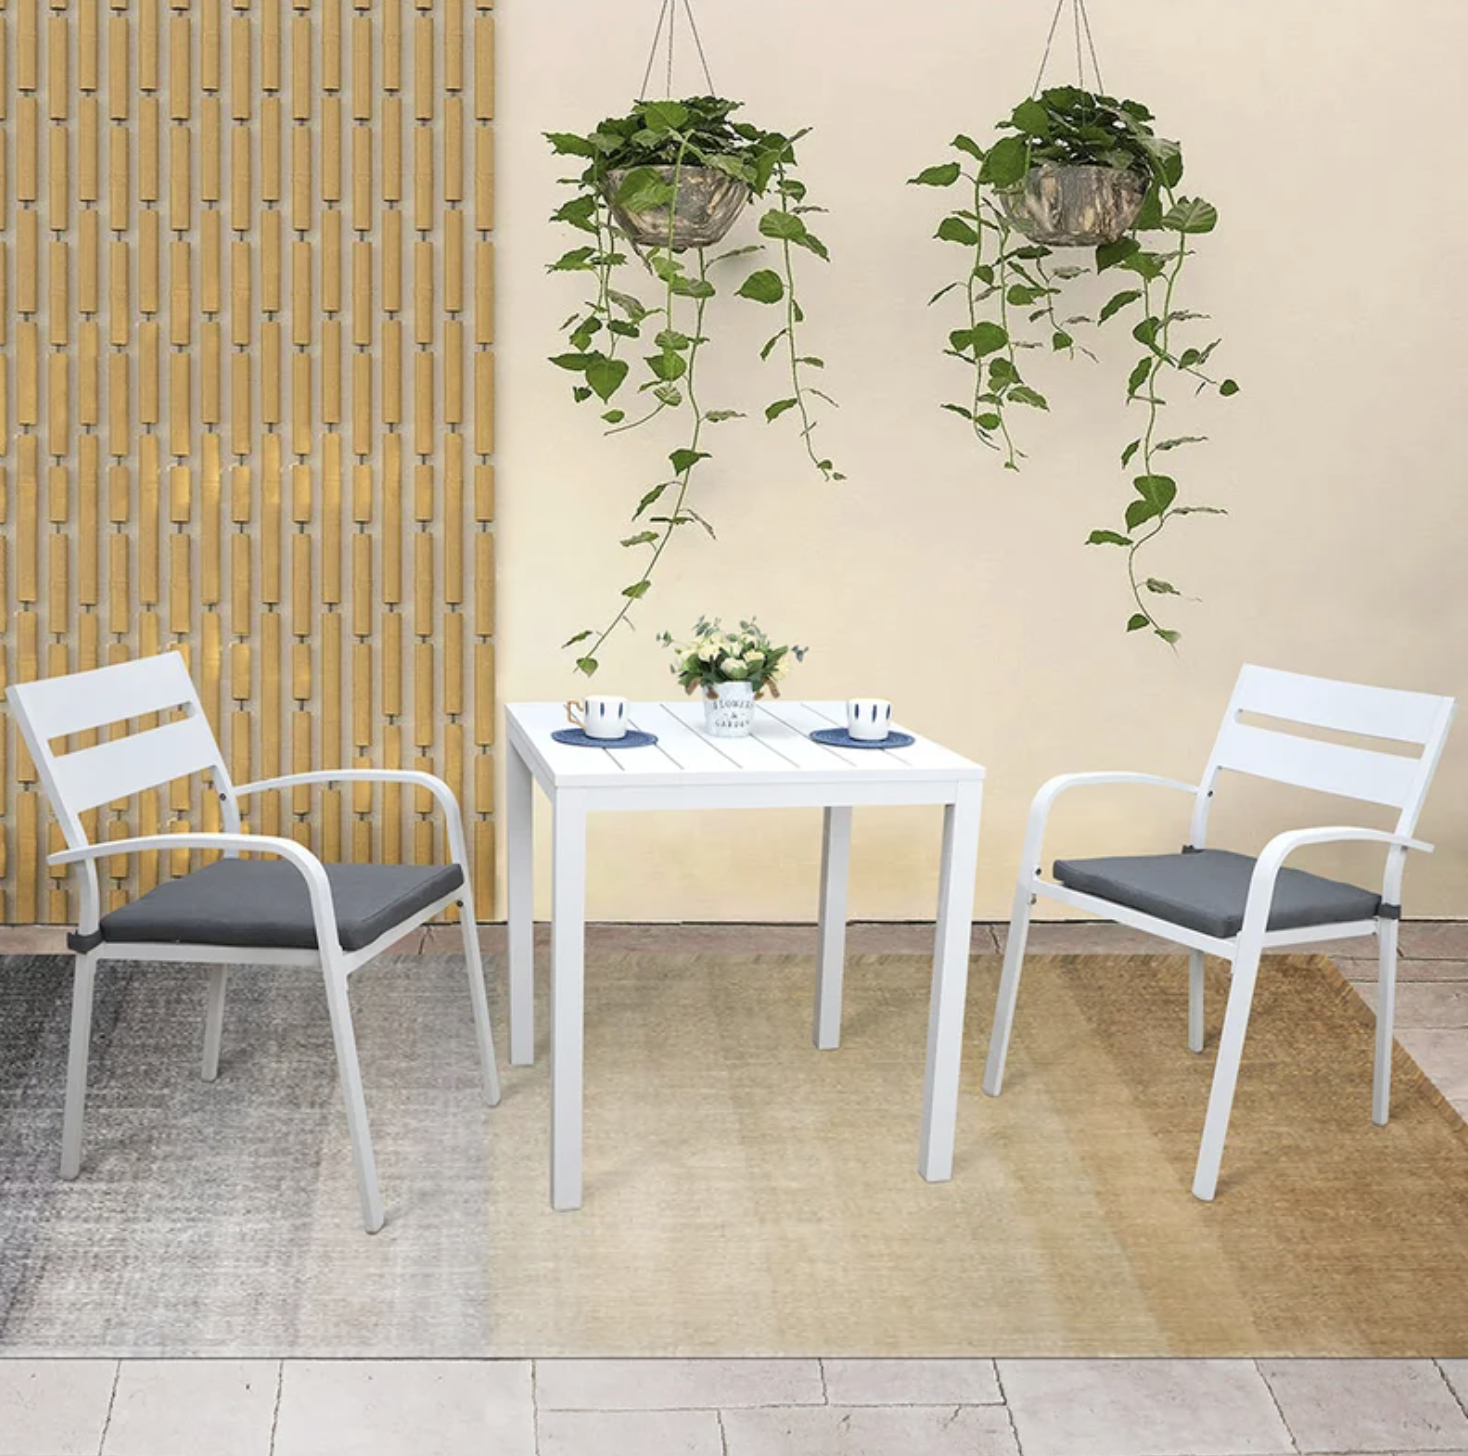 Patio furniture set with a white table and two chairs, placed against a neutral wall with hanging planters